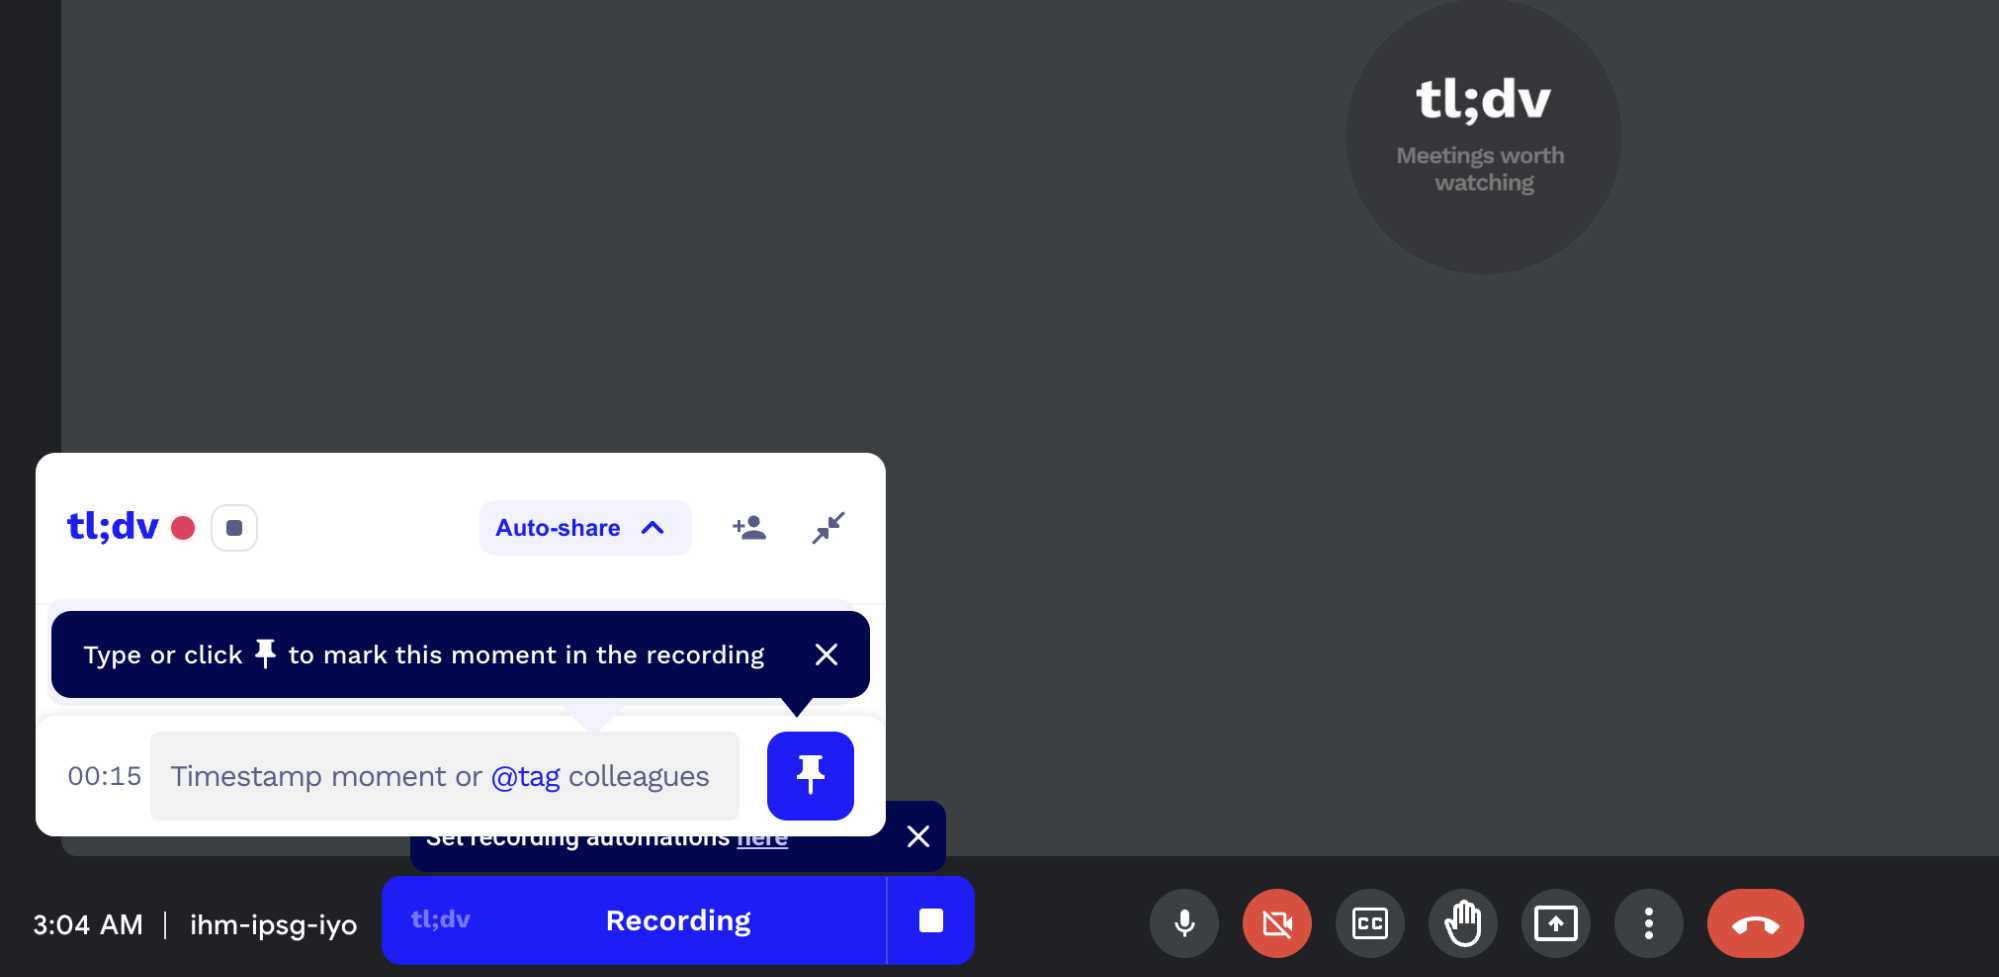 tl;dv recording interface with a timestamp and tagging feature for meetings.